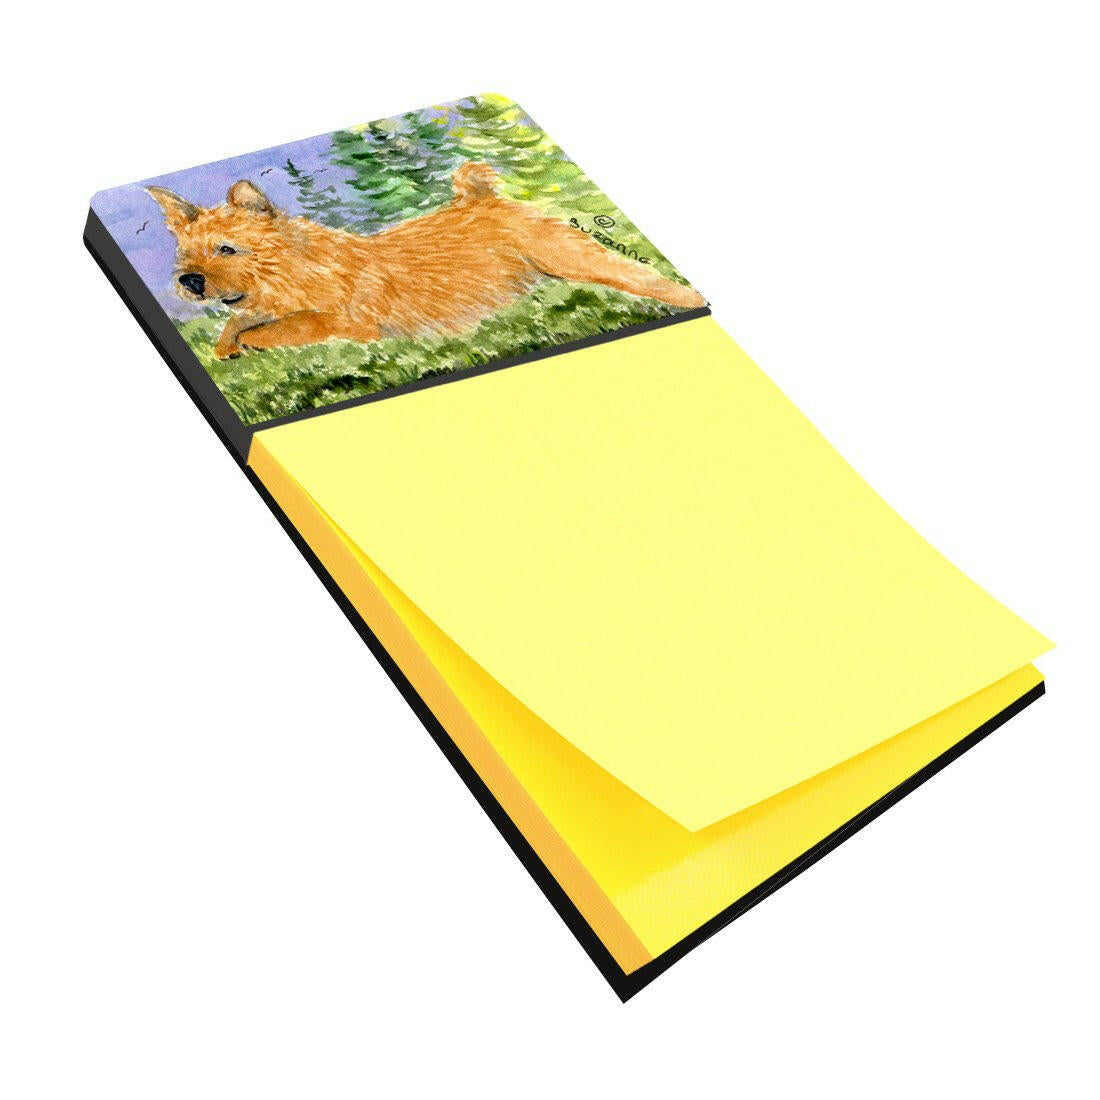 Norwich Terrier Refiillable Sticky Note Holder or Postit Note Dispenser SS8910SN by Caroline's Treasures